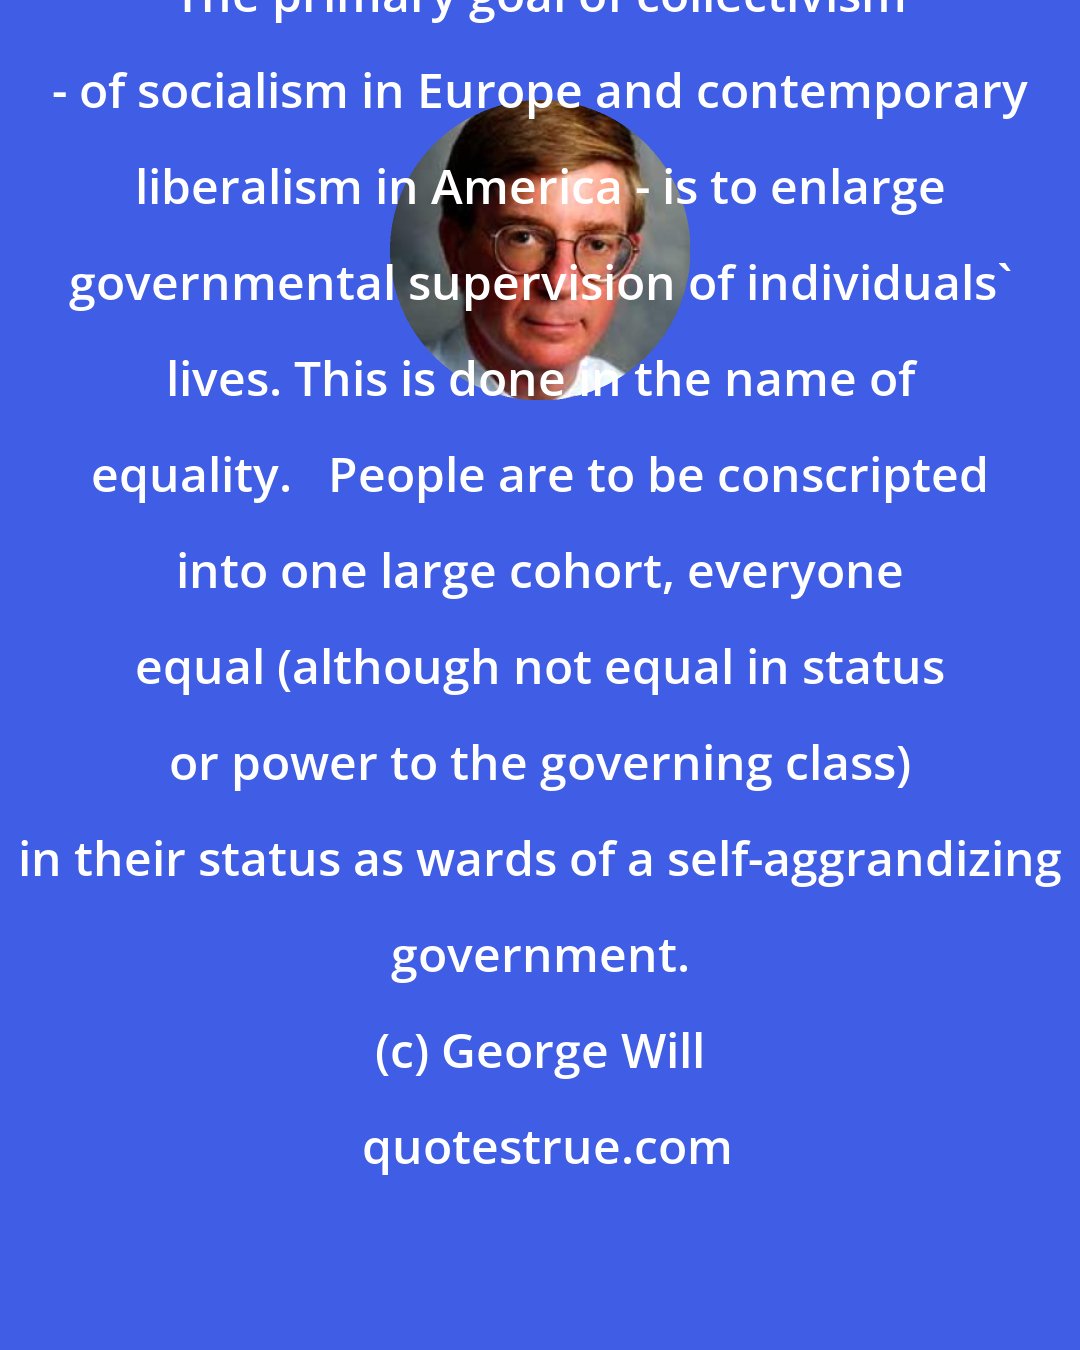 George Will: The primary goal of collectivism - of socialism in Europe and contemporary liberalism in America - is to enlarge governmental supervision of individuals' lives. This is done in the name of equality.   People are to be conscripted into one large cohort, everyone equal (although not equal in status or power to the governing class) in their status as wards of a self-aggrandizing government.